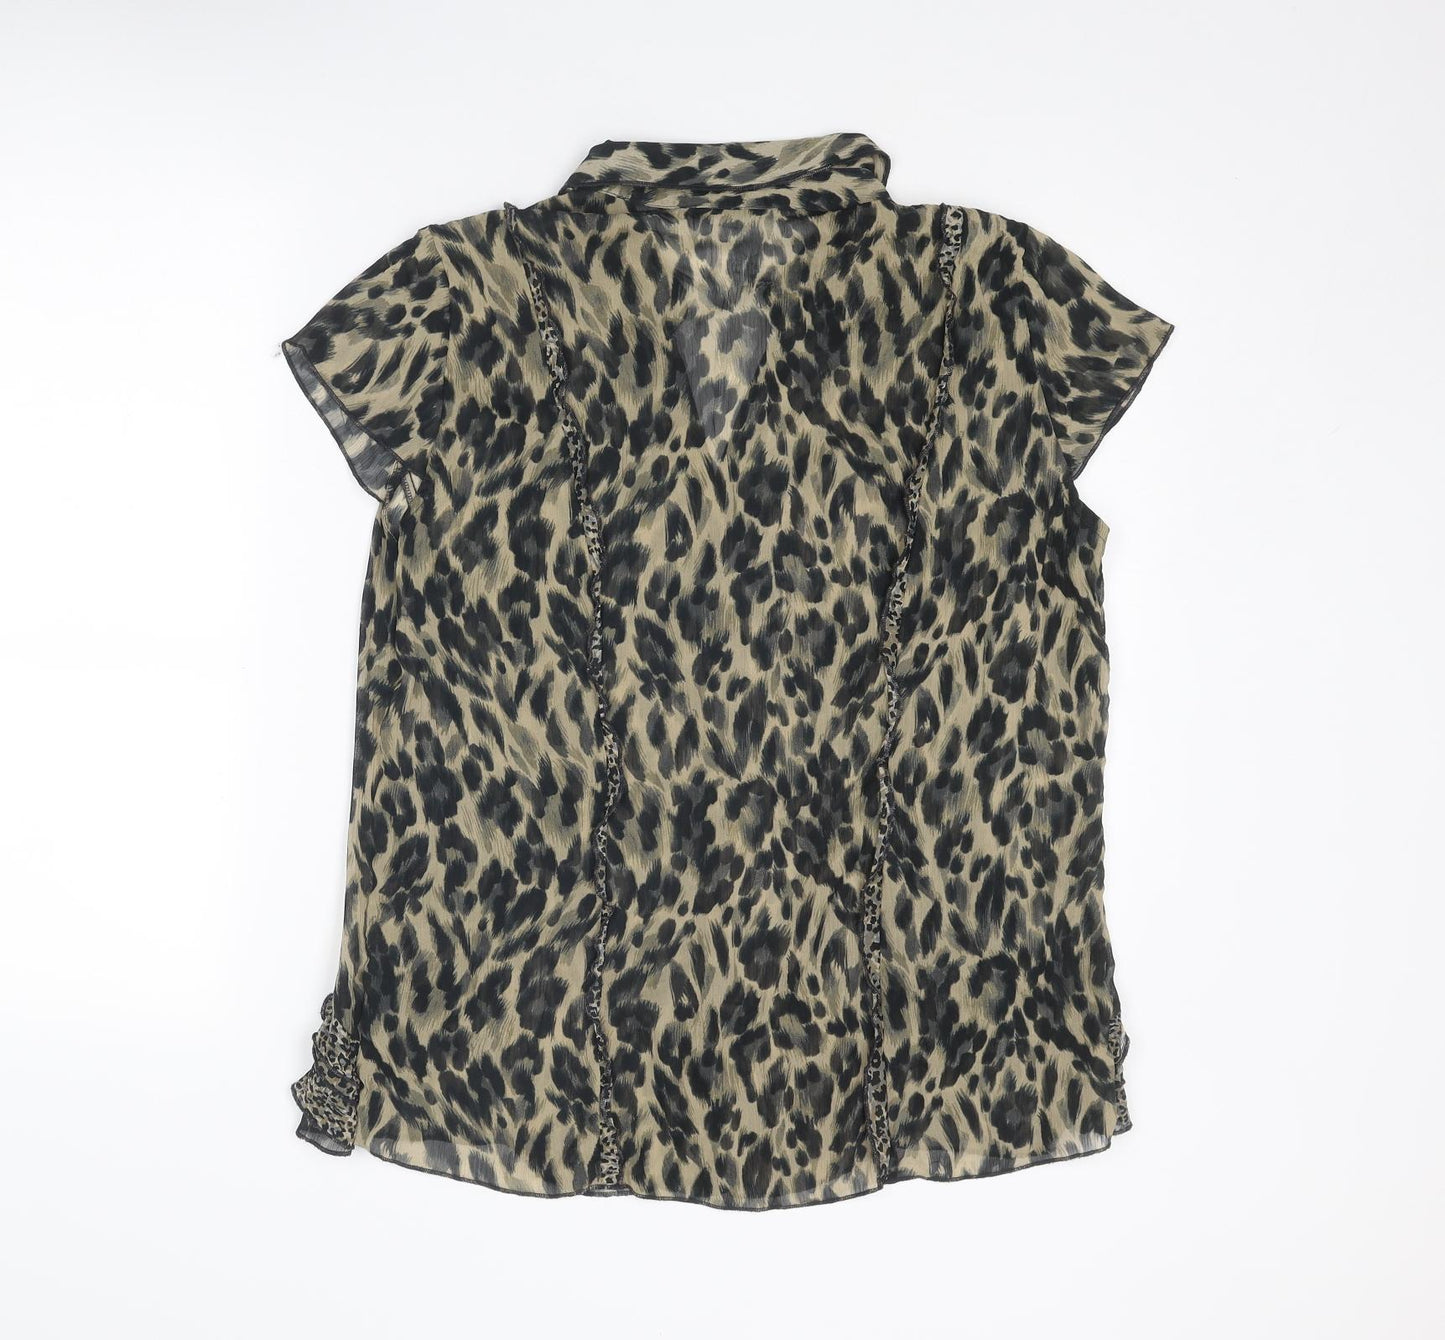 Per Una Womens Brown Animal Print Polyester Basic Blouse Size 12 Collared - Leopard Print